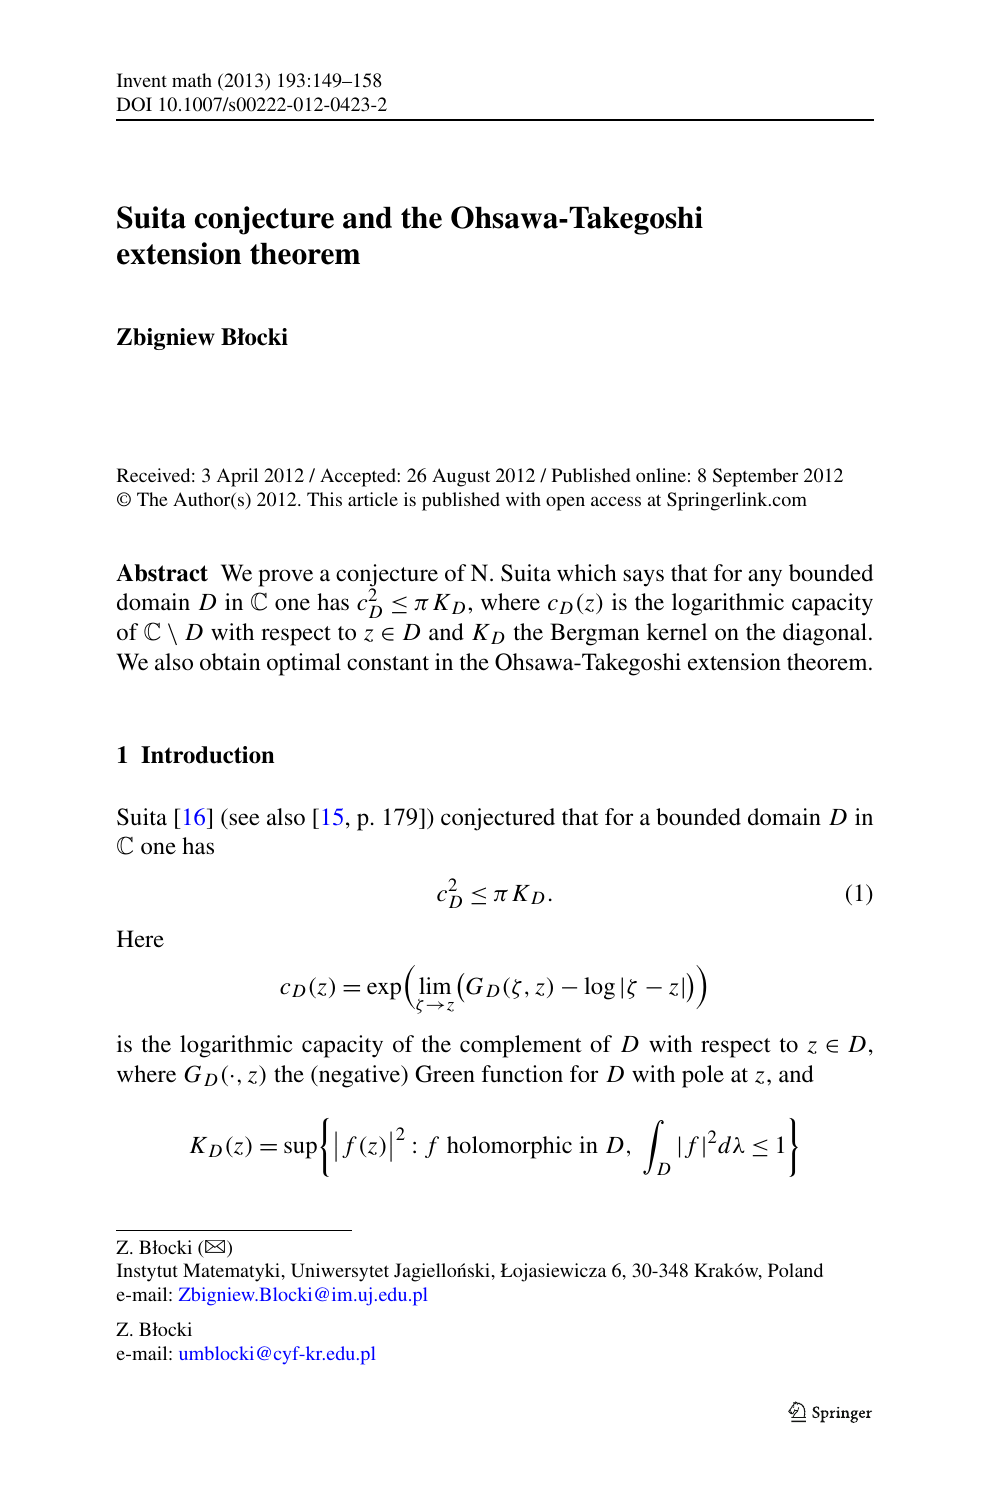 Suita Conjecture And The Ohsawa Takegoshi Extension Theorem Topic Of Research Paper In Mathematics Download Scholarly Article Pdf And Read For Free On Cyberleninka Open Science Hub